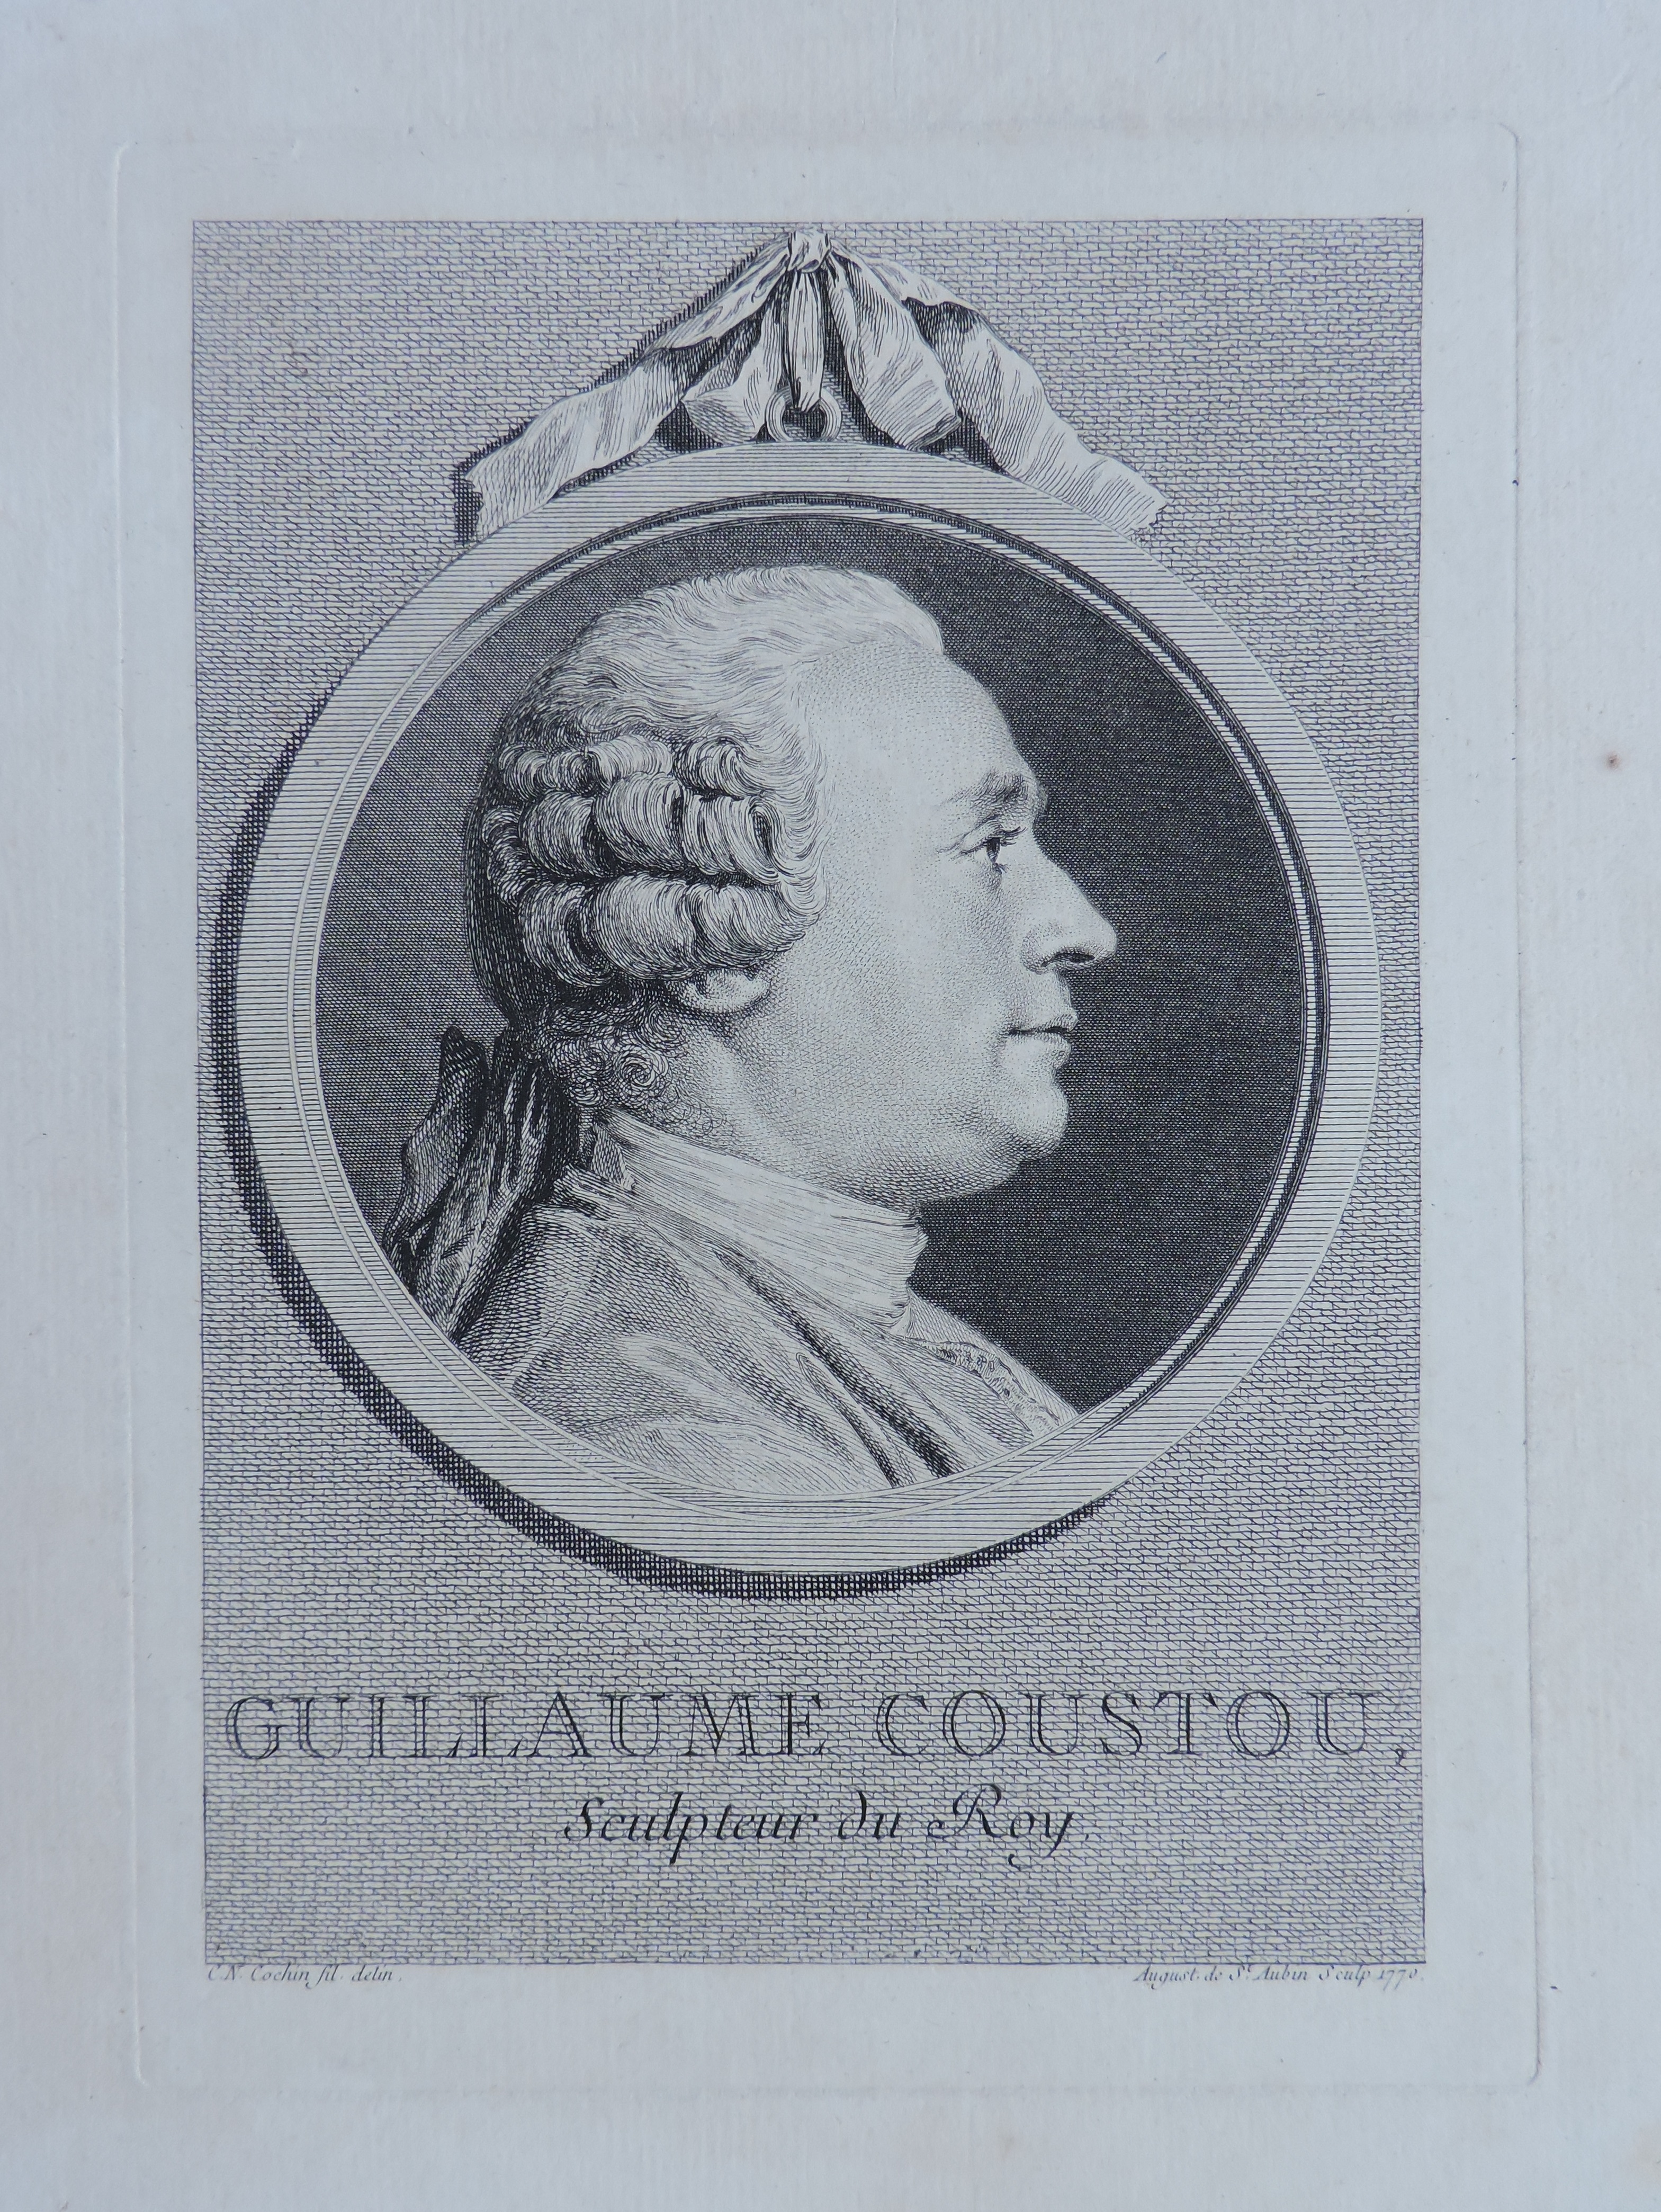 Guillaume Coustou